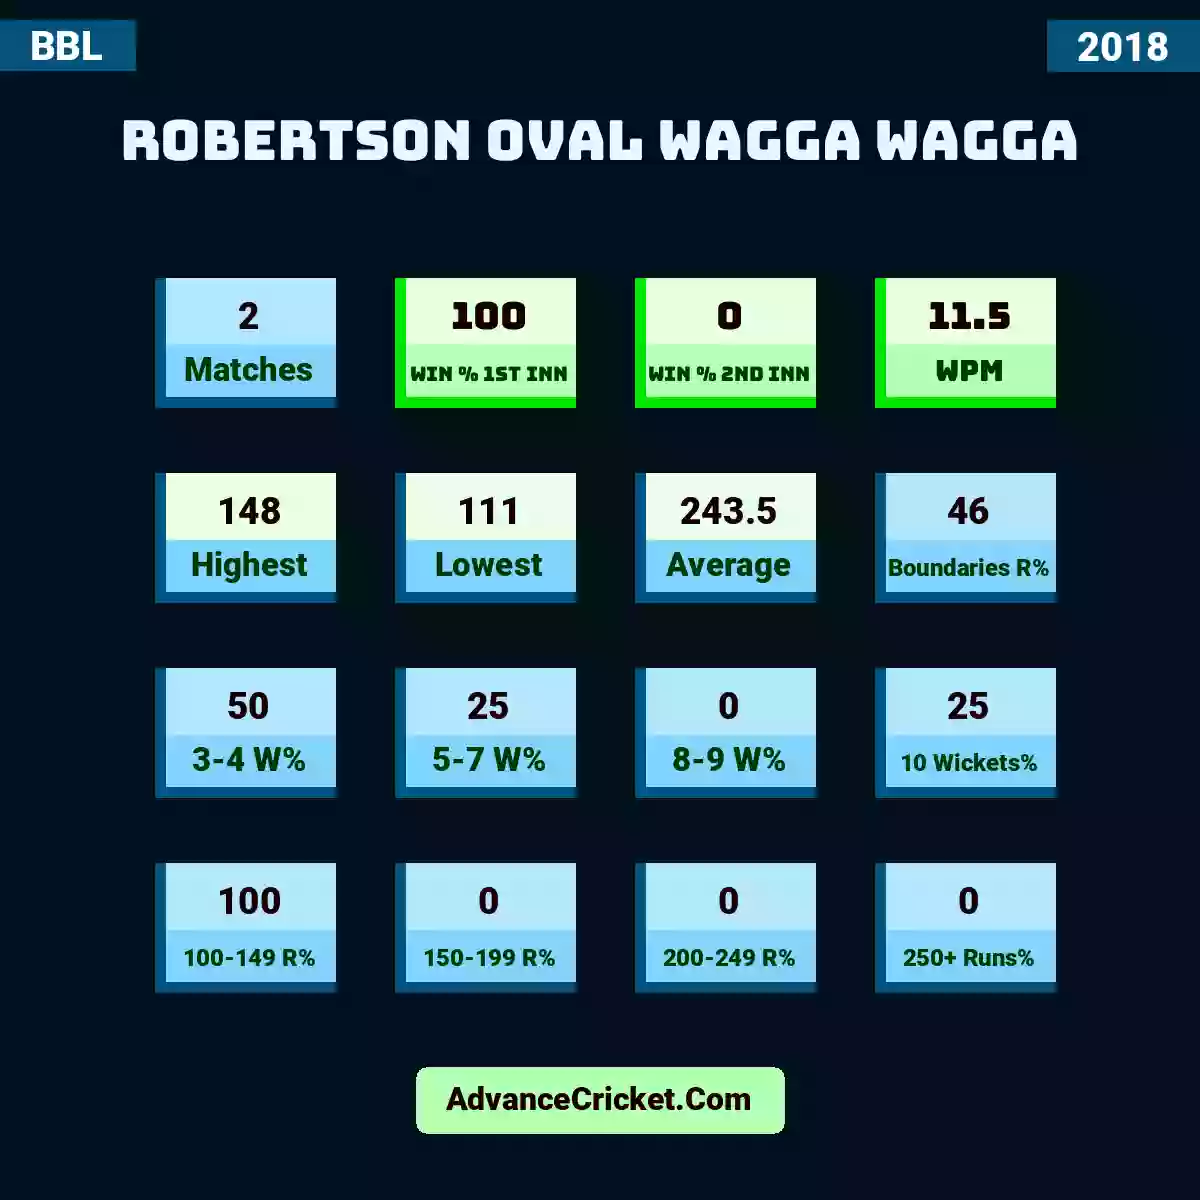 Image showing Robertson Oval Wagga Wagga with Matches: 2, Win % 1st Inn: 100, Win % 2nd Inn: 0, WPM: 11.5, Highest: 148, Lowest: 111, Average: 243.5, Boundaries R%: 46, 3-4 W%: 50, 5-7 W%: 25, 8-9 W%: 0, 10 Wickets%: 25, 100-149 R%: 100, 150-199 R%: 0, 200-249 R%: 0, 250+ Runs%: 0.